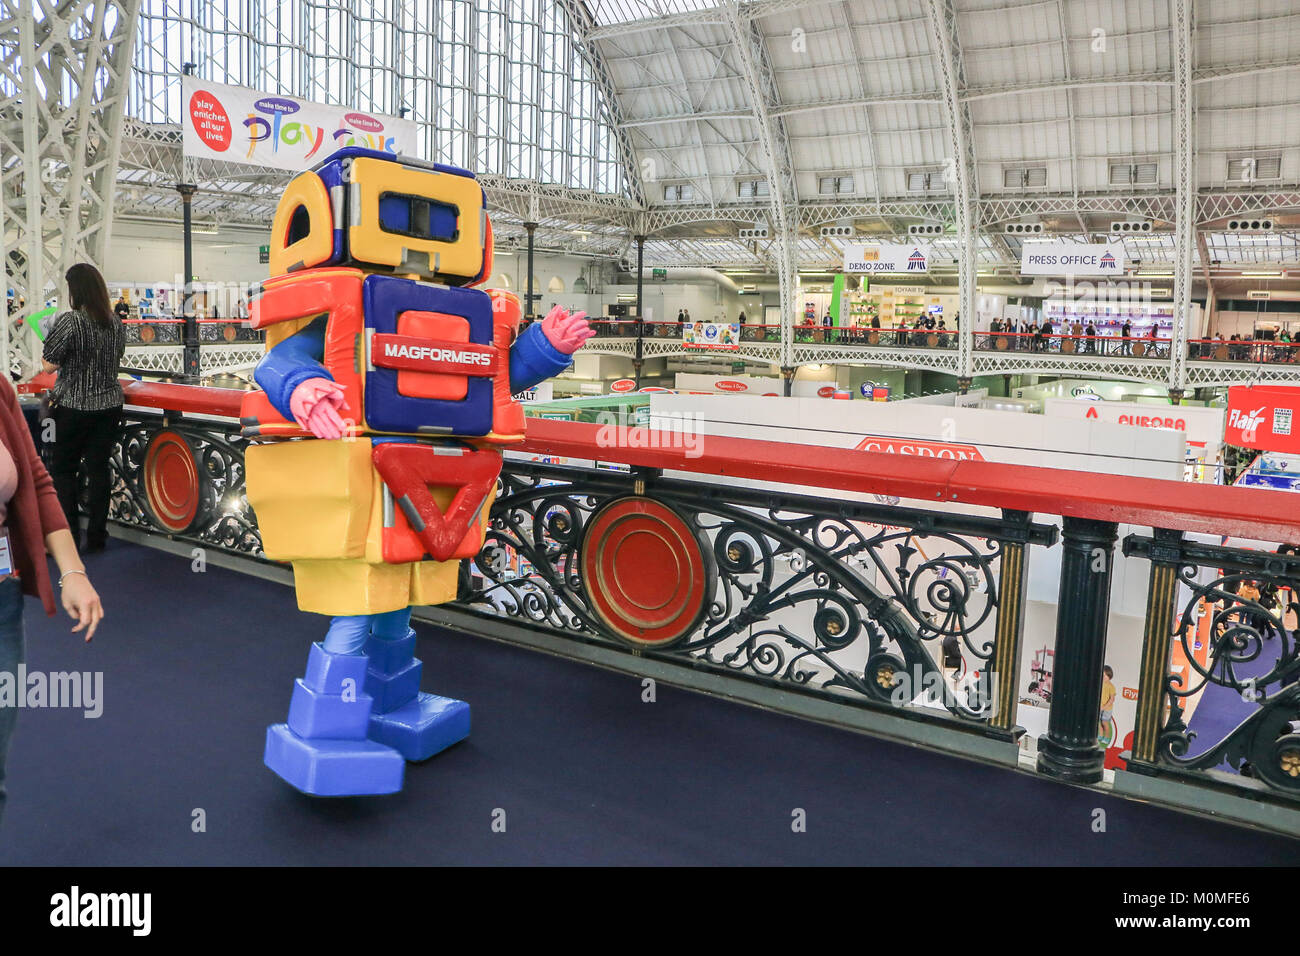 London, UK. 23rd Jan, 2018. The 65th annual toy fair organized by the British Toy and Hobby Associaiton opens at London Olympia showcasing more than 260 brands and products from UK and International toy manufacturers Credit: amer ghazzal/Alamy Live News Stock Photo